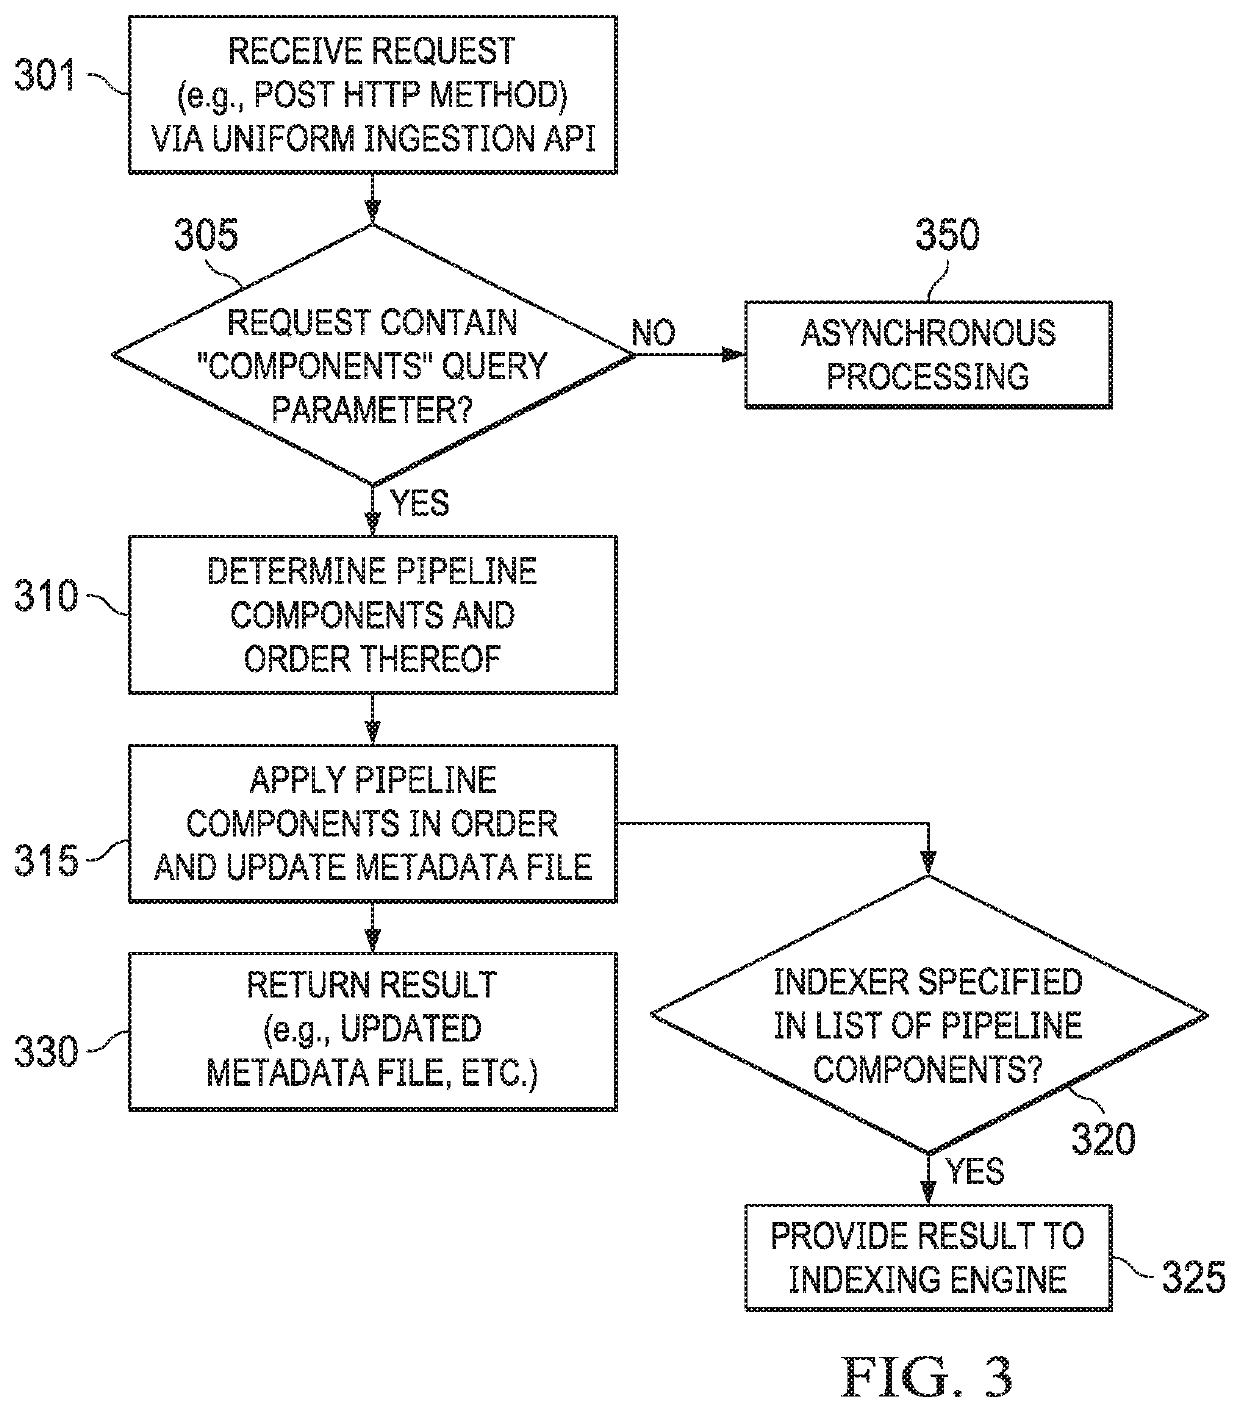 Synchronous ingestion pipeline for data processing